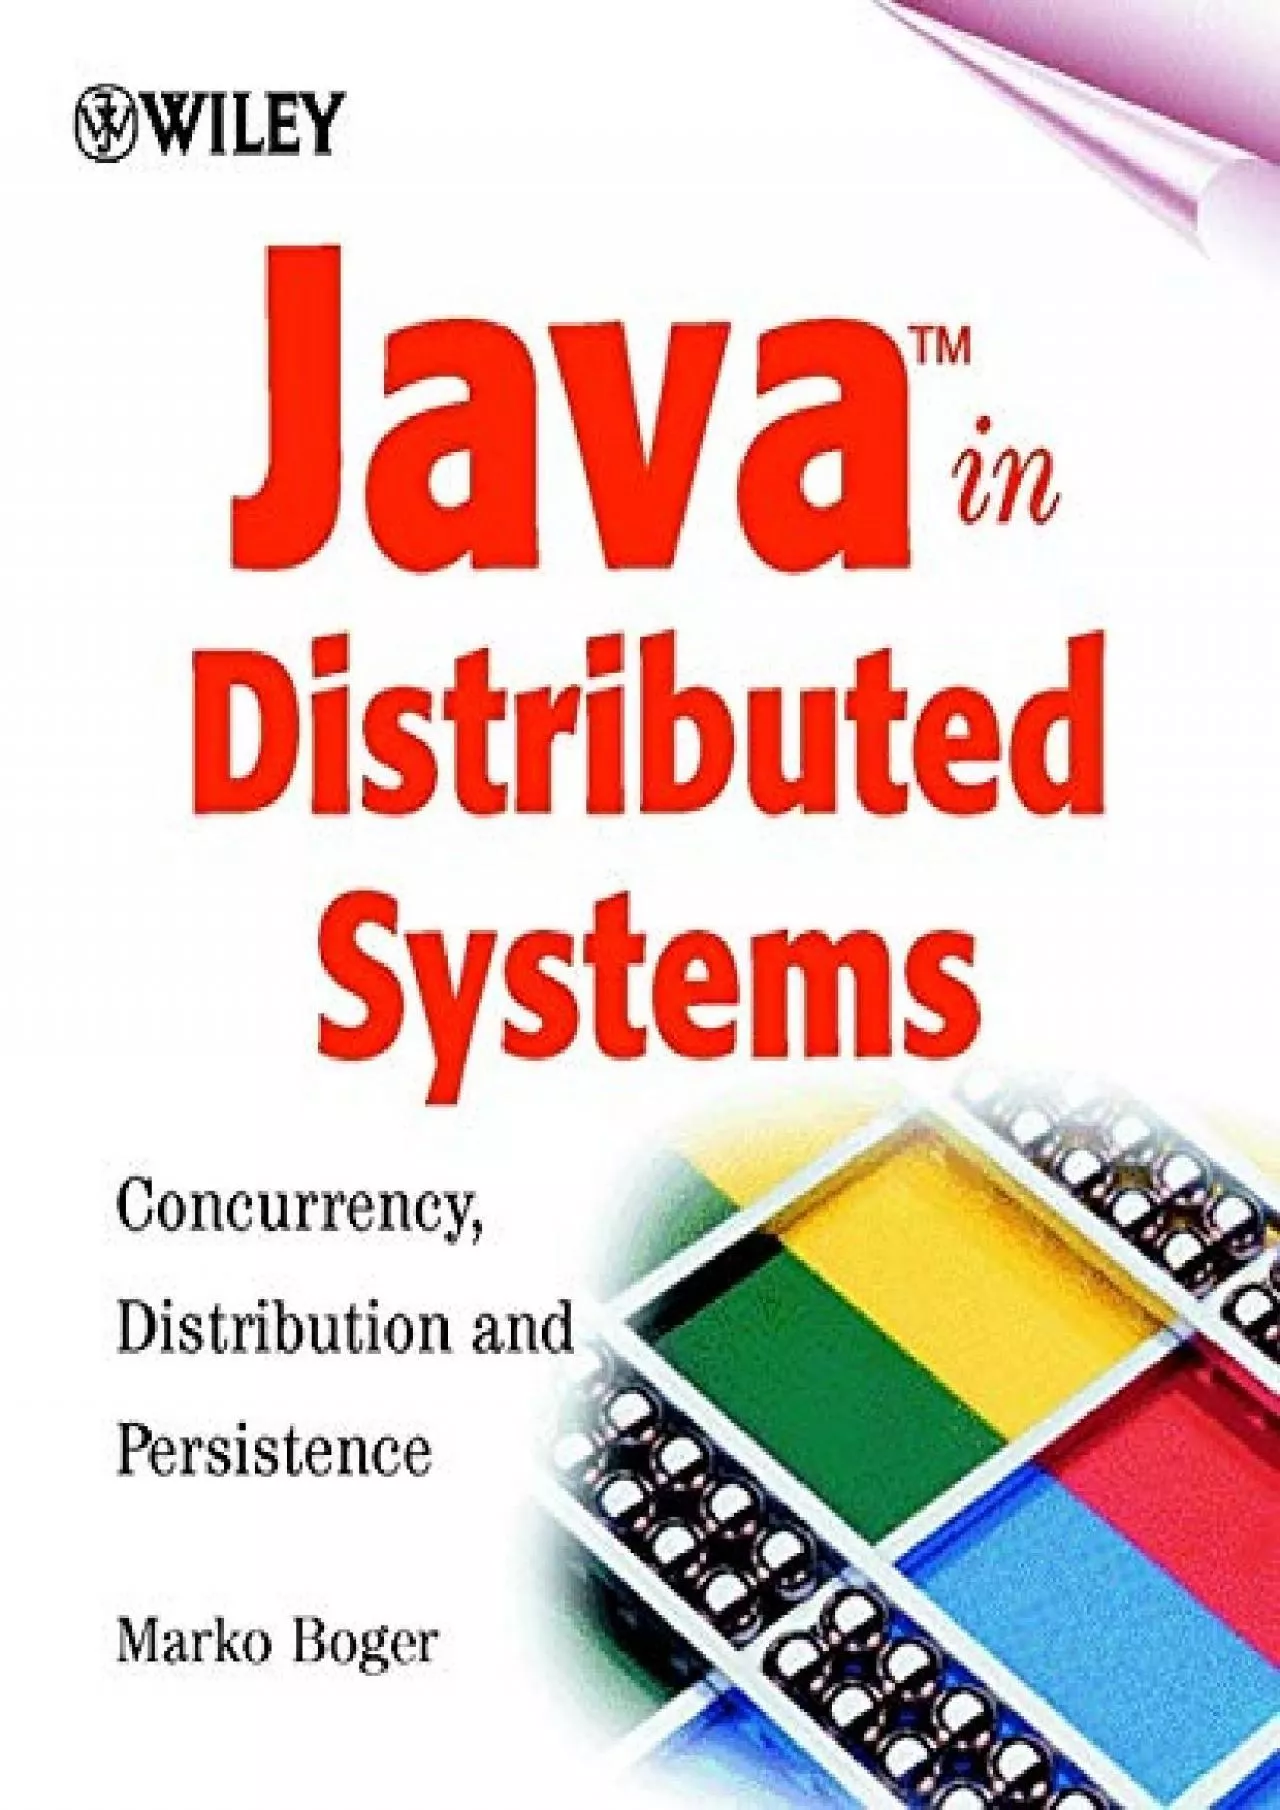 [DOWLOAD]-Java in Distributed Systems: Concurrency, Distribution and Persistence